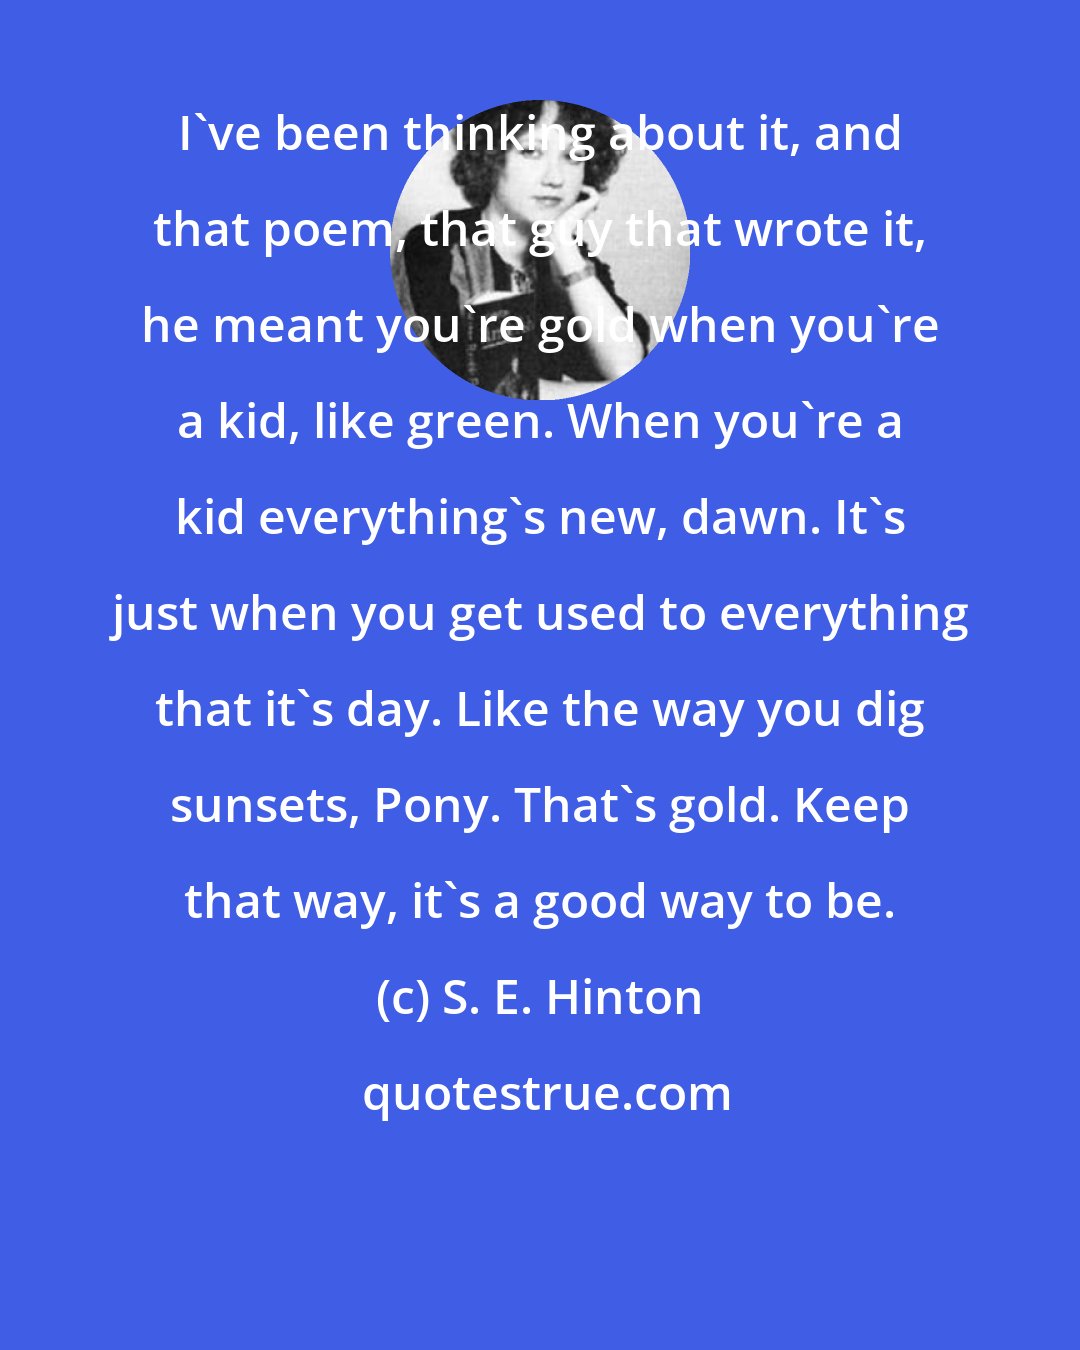 S. E. Hinton: I've been thinking about it, and that poem, that guy that wrote it, he meant you're gold when you're a kid, like green. When you're a kid everything's new, dawn. It's just when you get used to everything that it's day. Like the way you dig sunsets, Pony. That's gold. Keep that way, it's a good way to be.